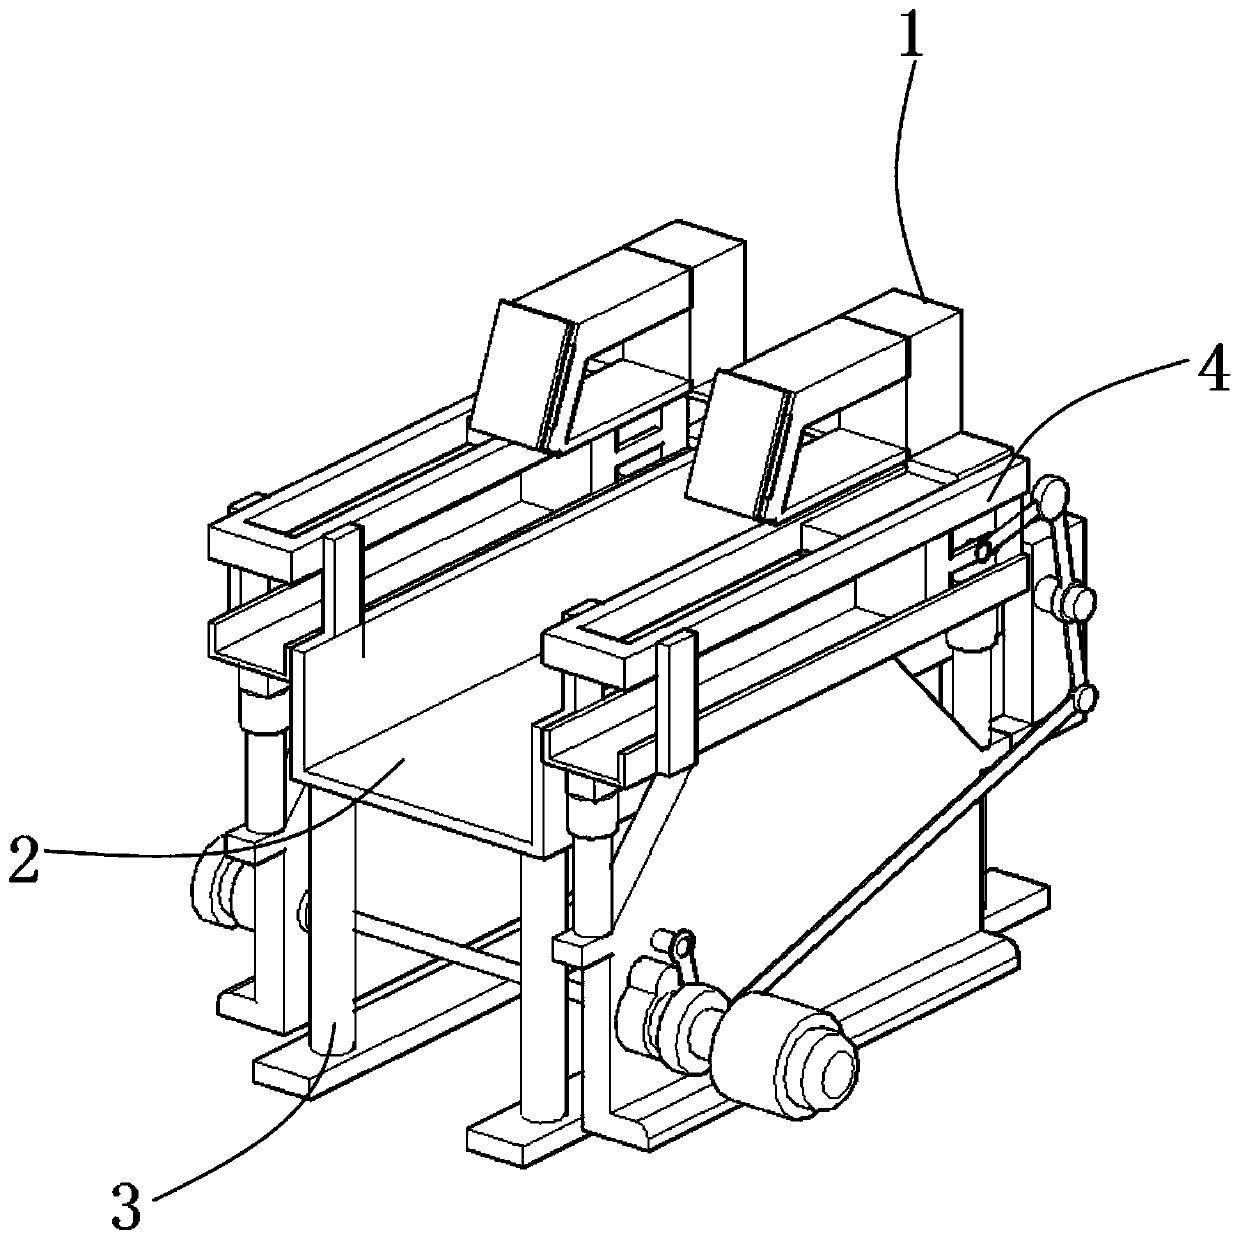 Pushing device for machining production